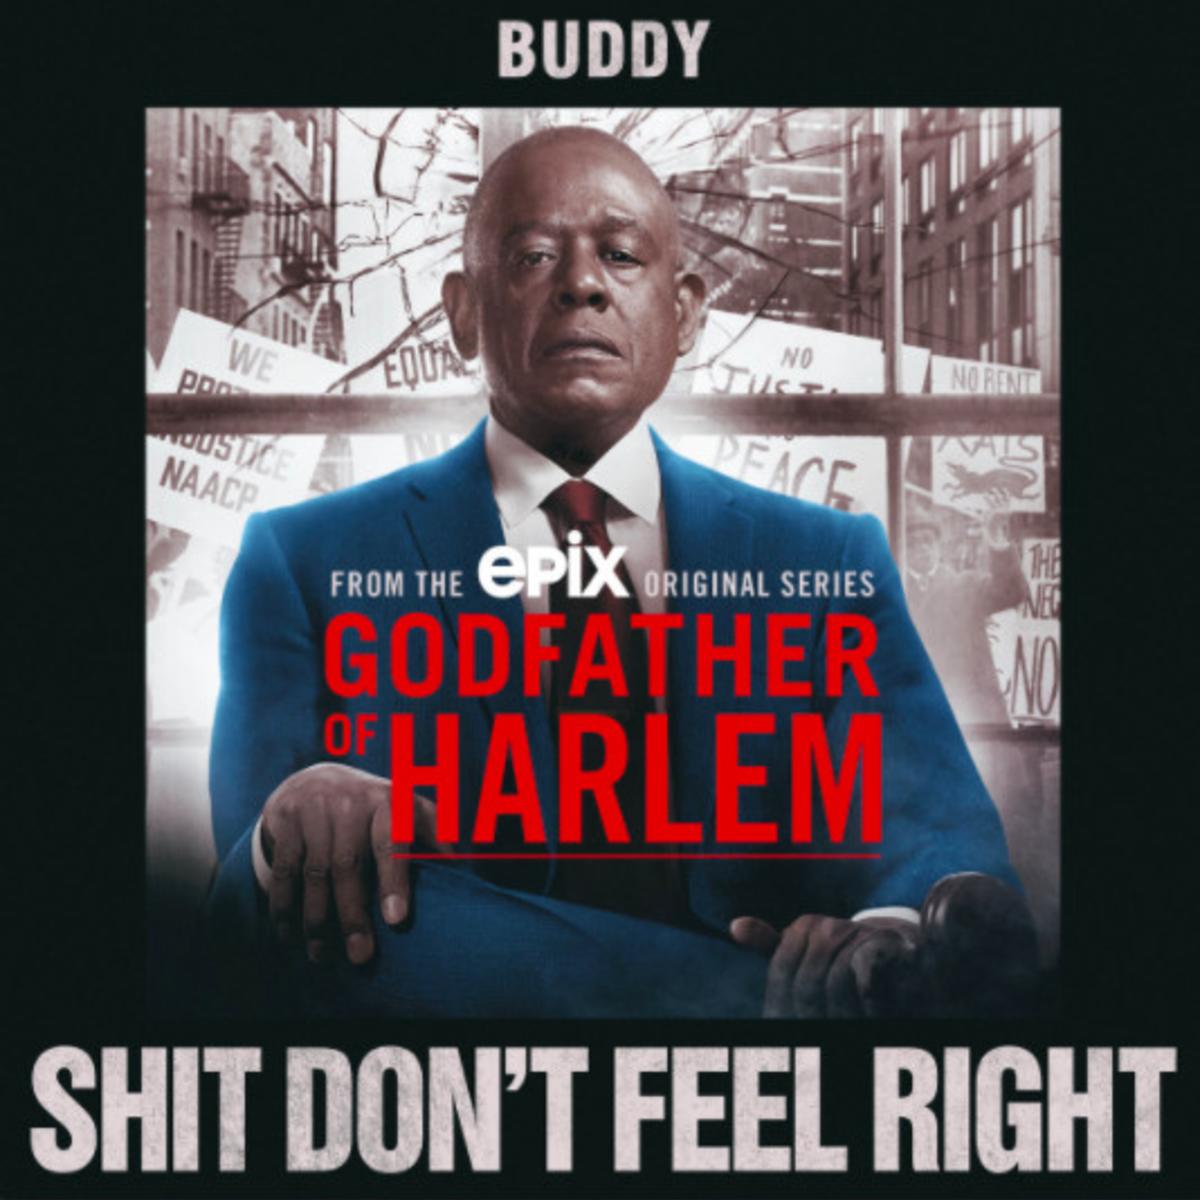 Buddy Releases “Shit Don’t Feel Right” Off The Godfather Of Harlem Soundtrack